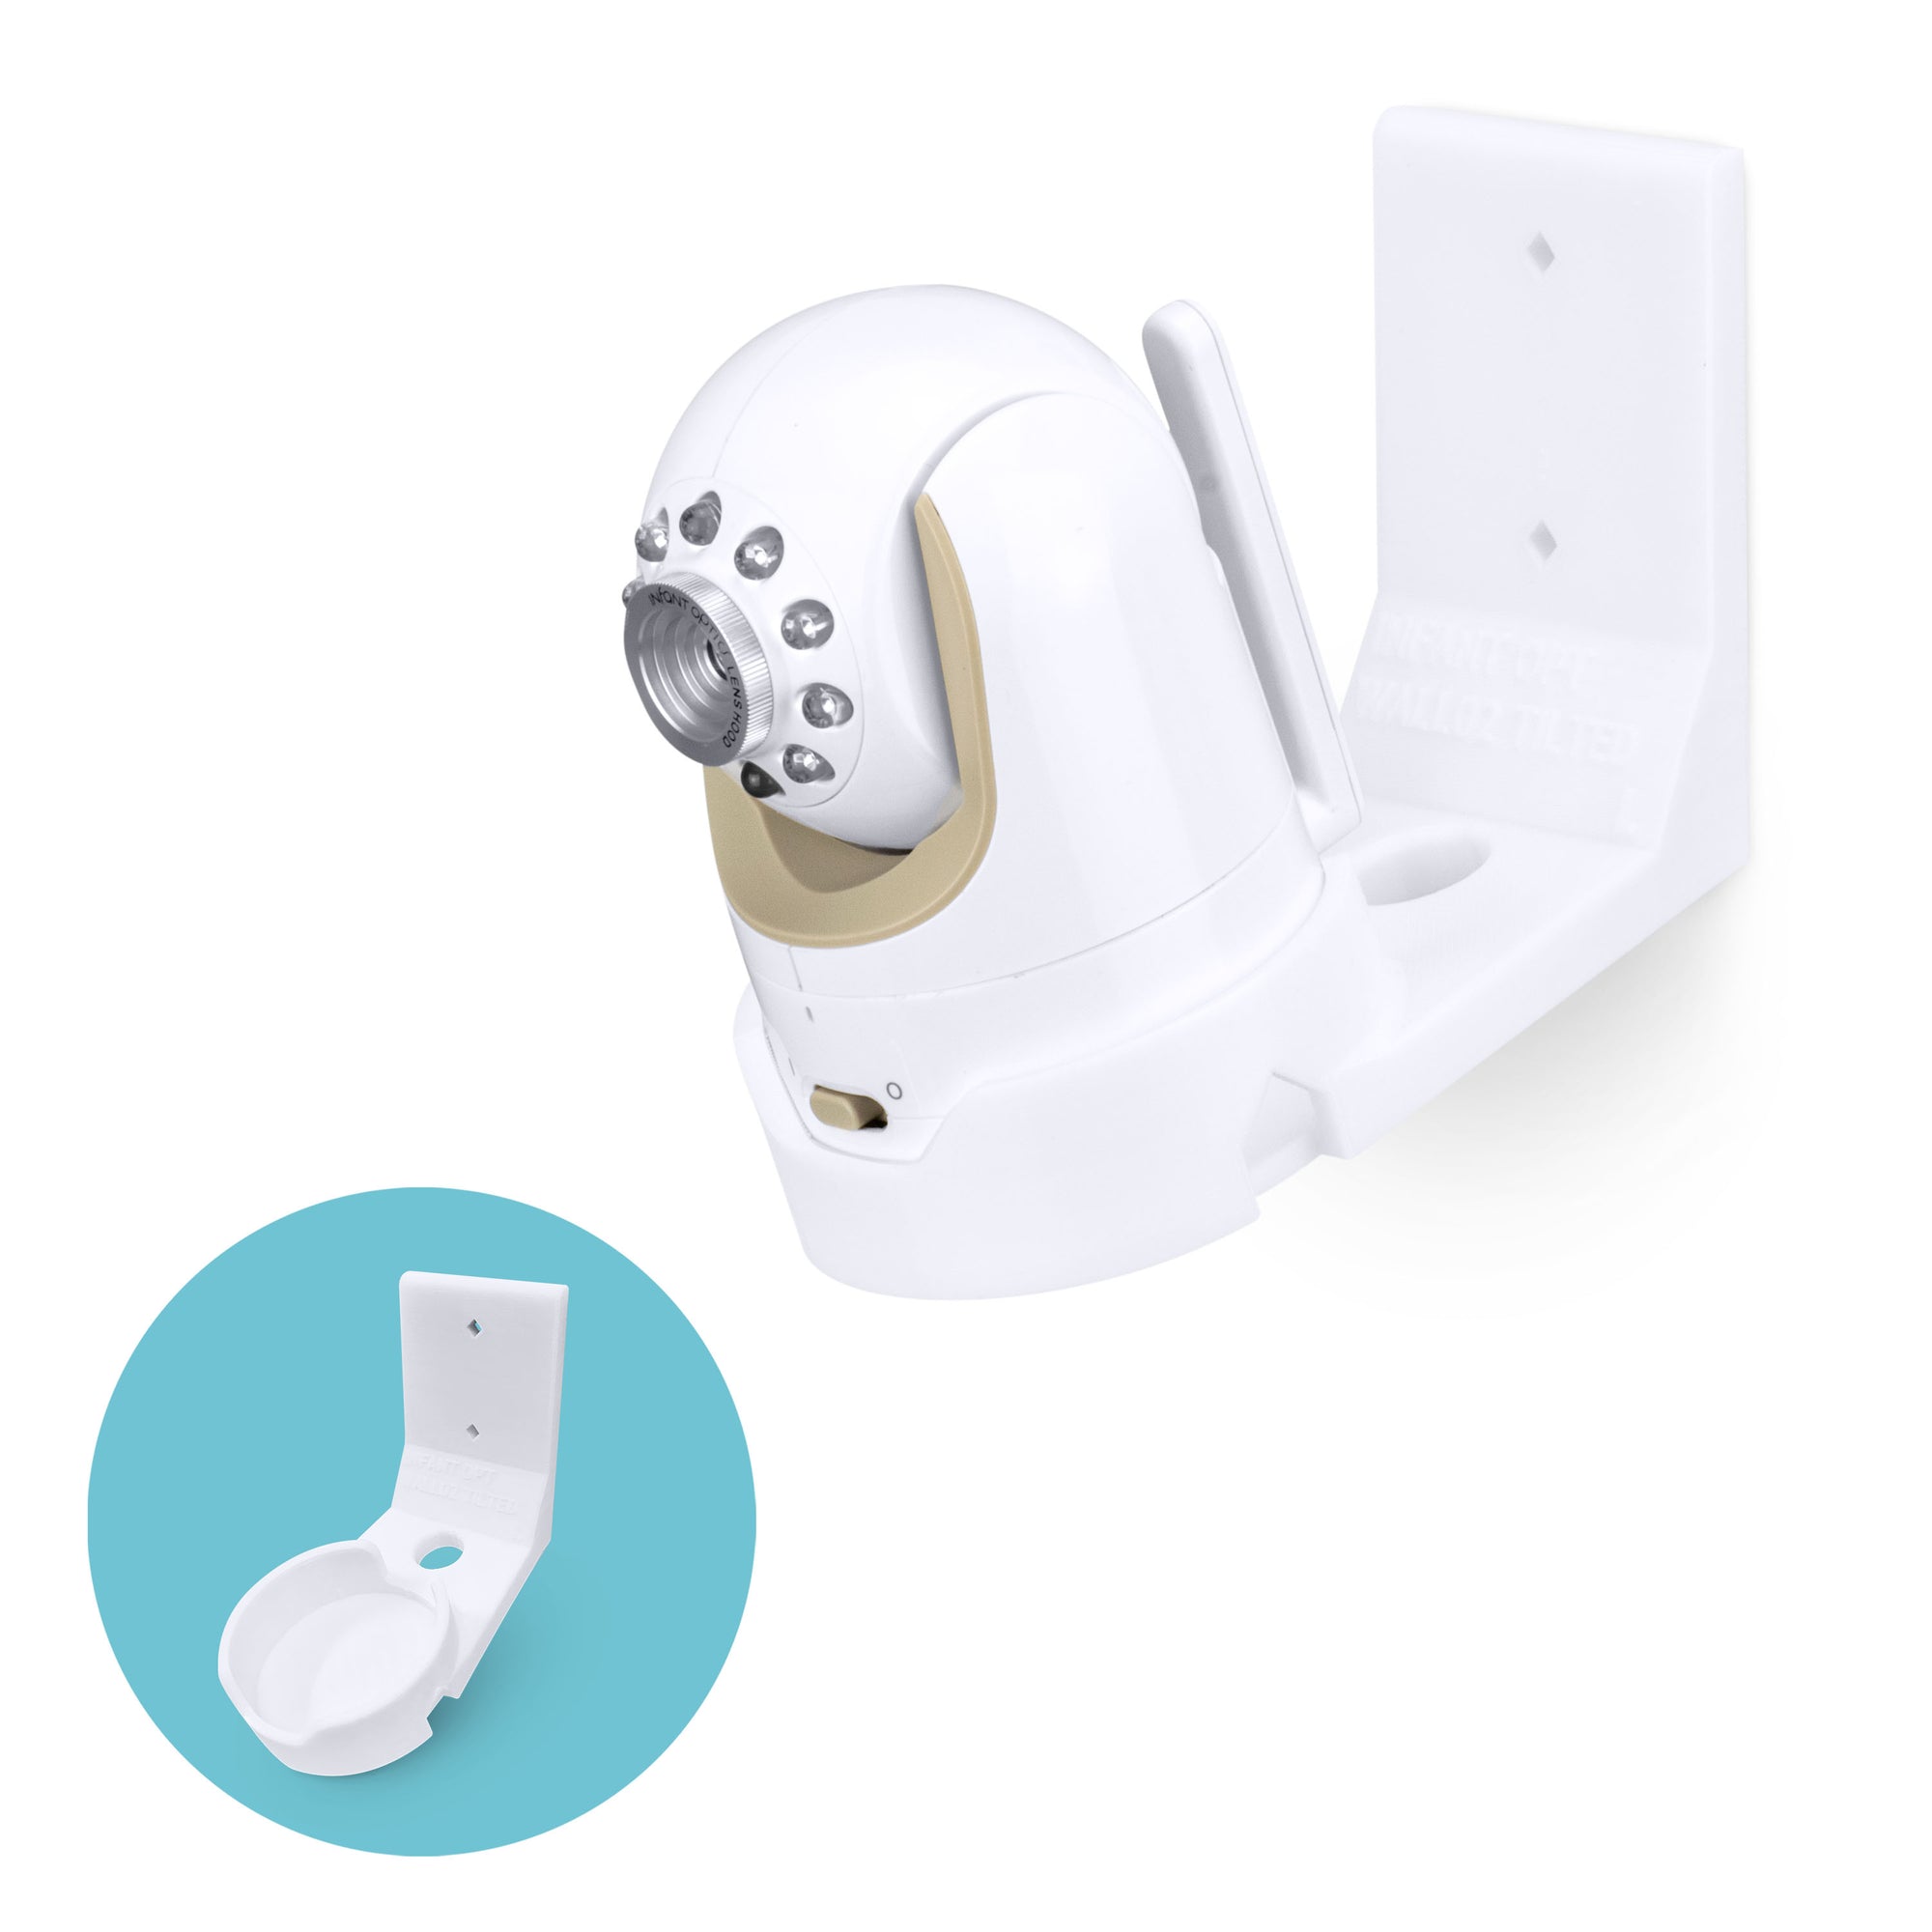 Infant Optics DXR8 & Pro Tilted Wall Mount Holder, Adhesive & Screw-In Holder, Easy to Install